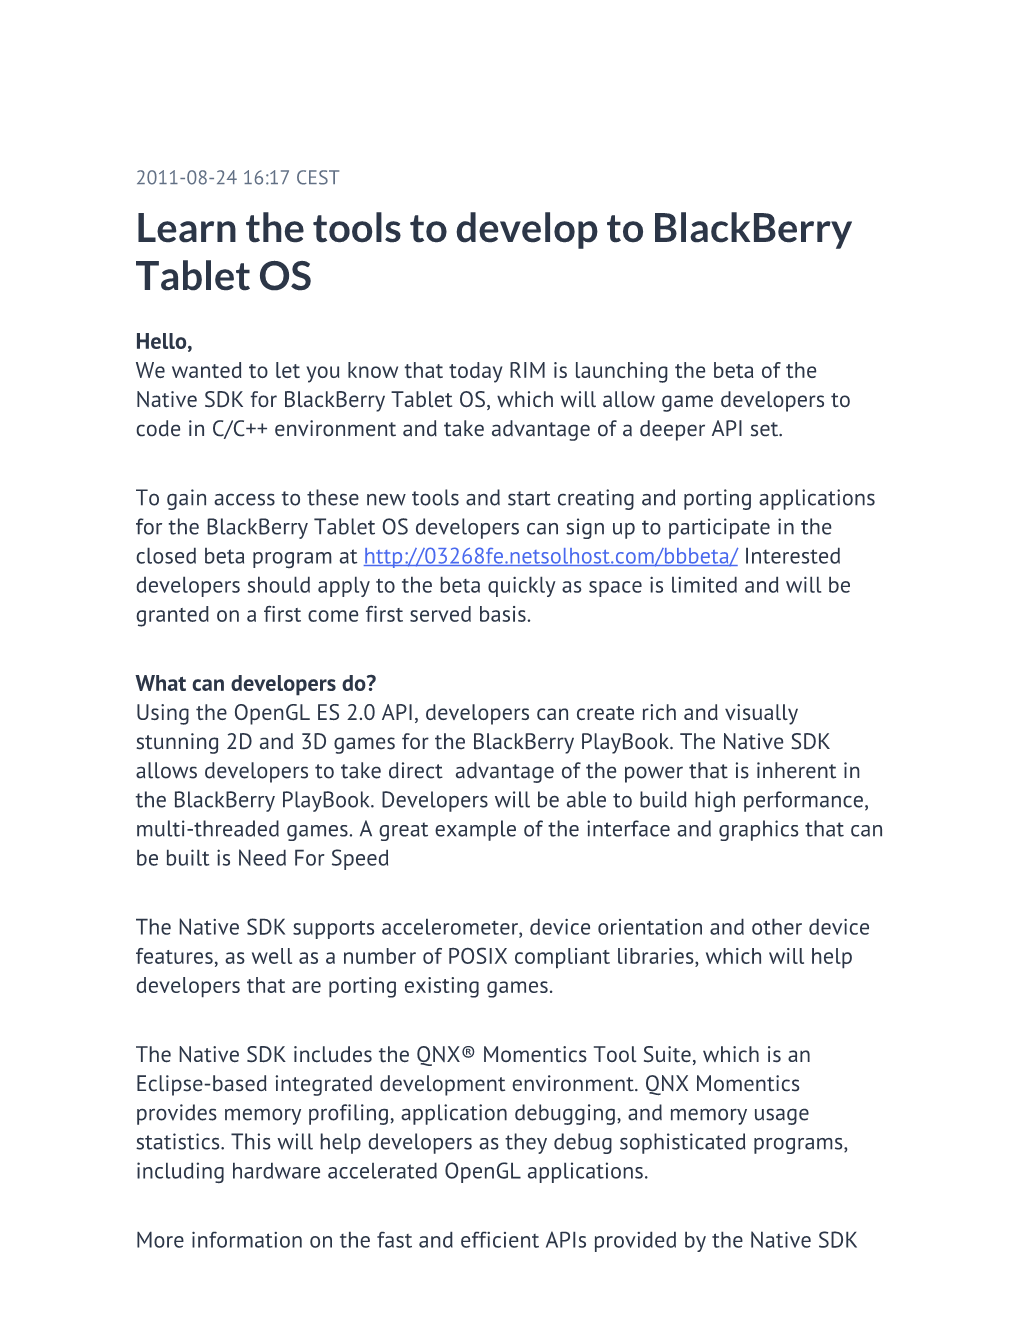 Learn the Tools to Develop to Blackberry Tablet OS